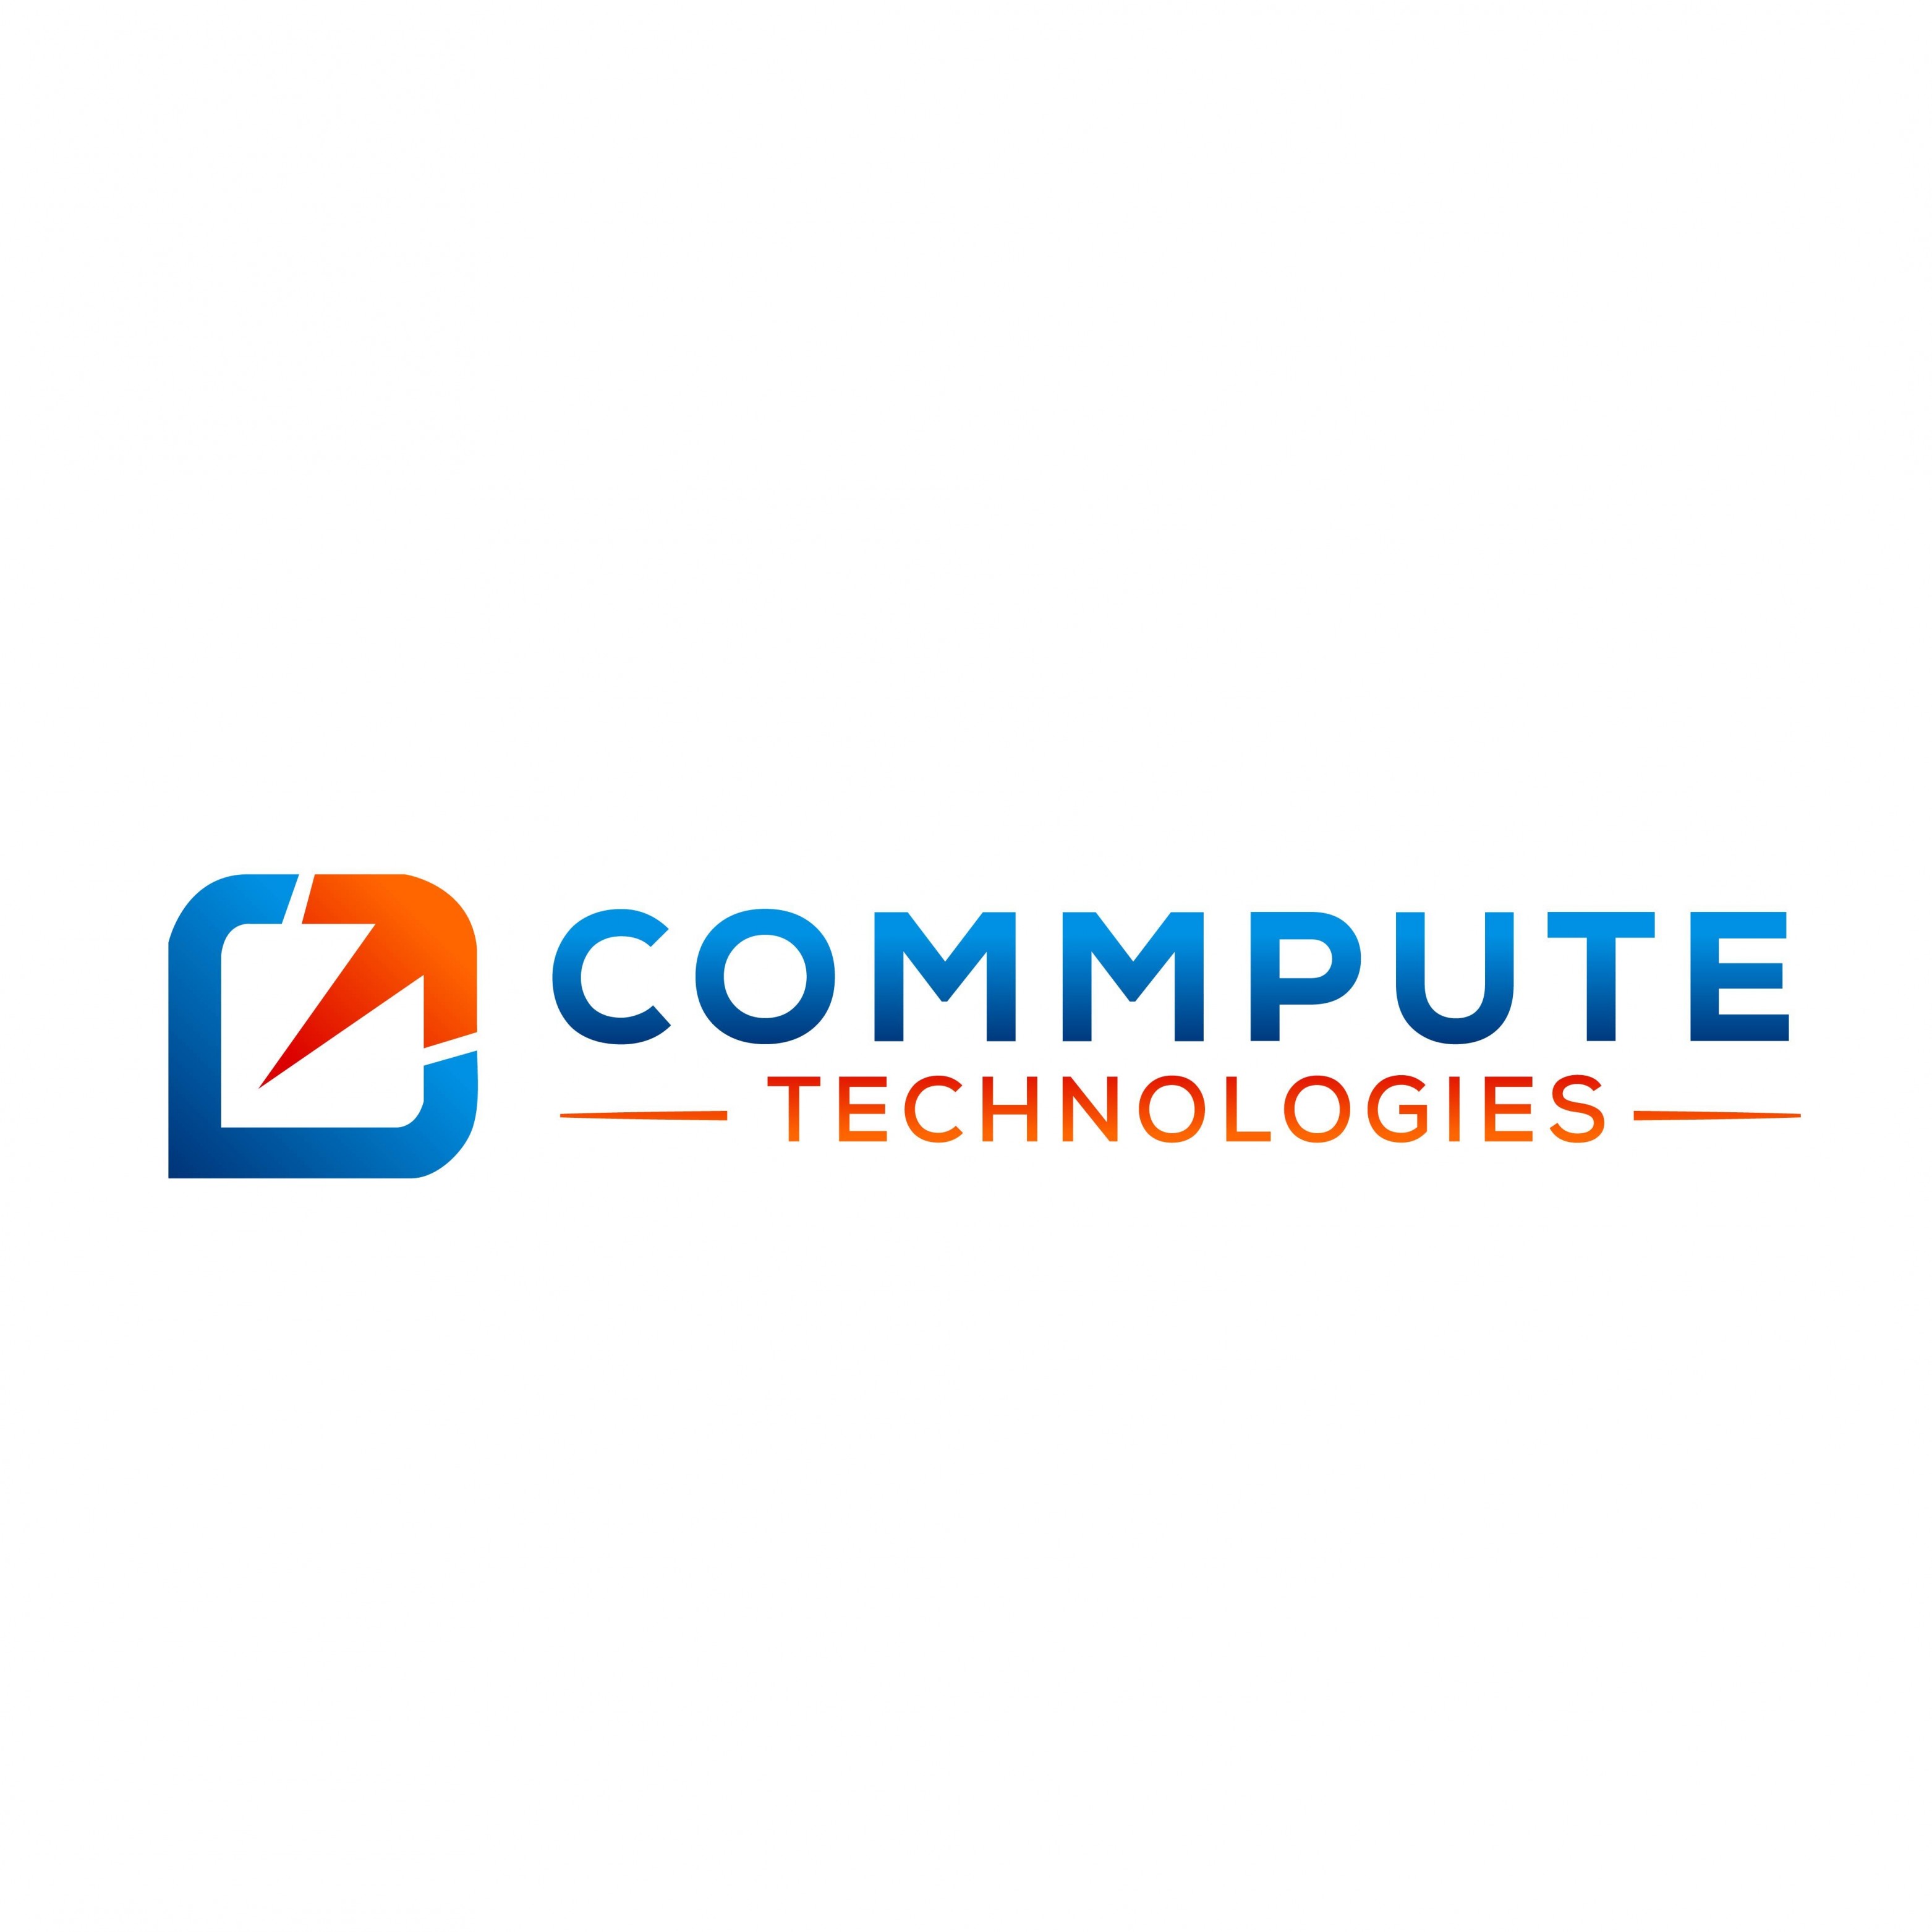 Commpute Technologies Pvt. Ltd. is an award-winning ISO 9001: 2008 Certified Managed IT Services, CRM, HRMS, website and mobile app development company India. With a team of 450+ professionals with un